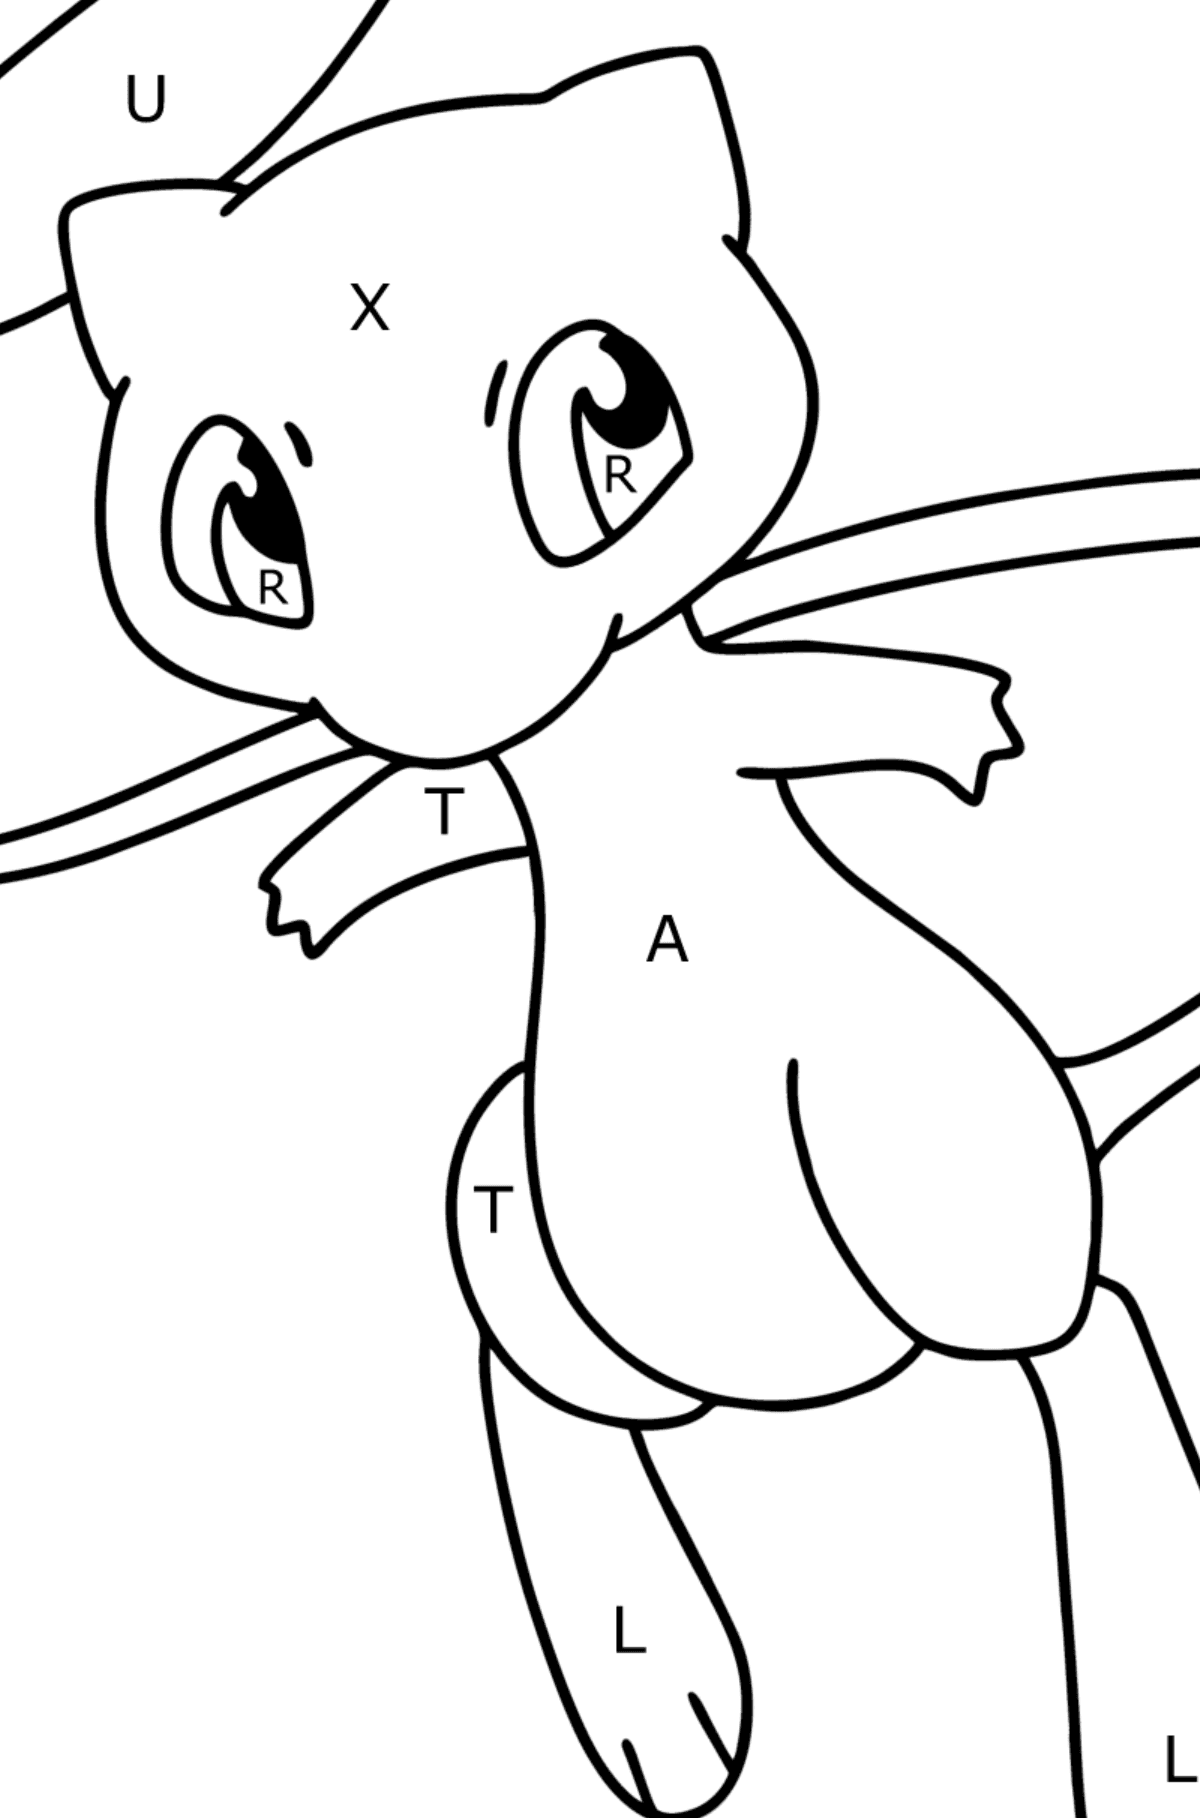 Coloring page Pokemon Go Mew - Coloring by Letters for Kids